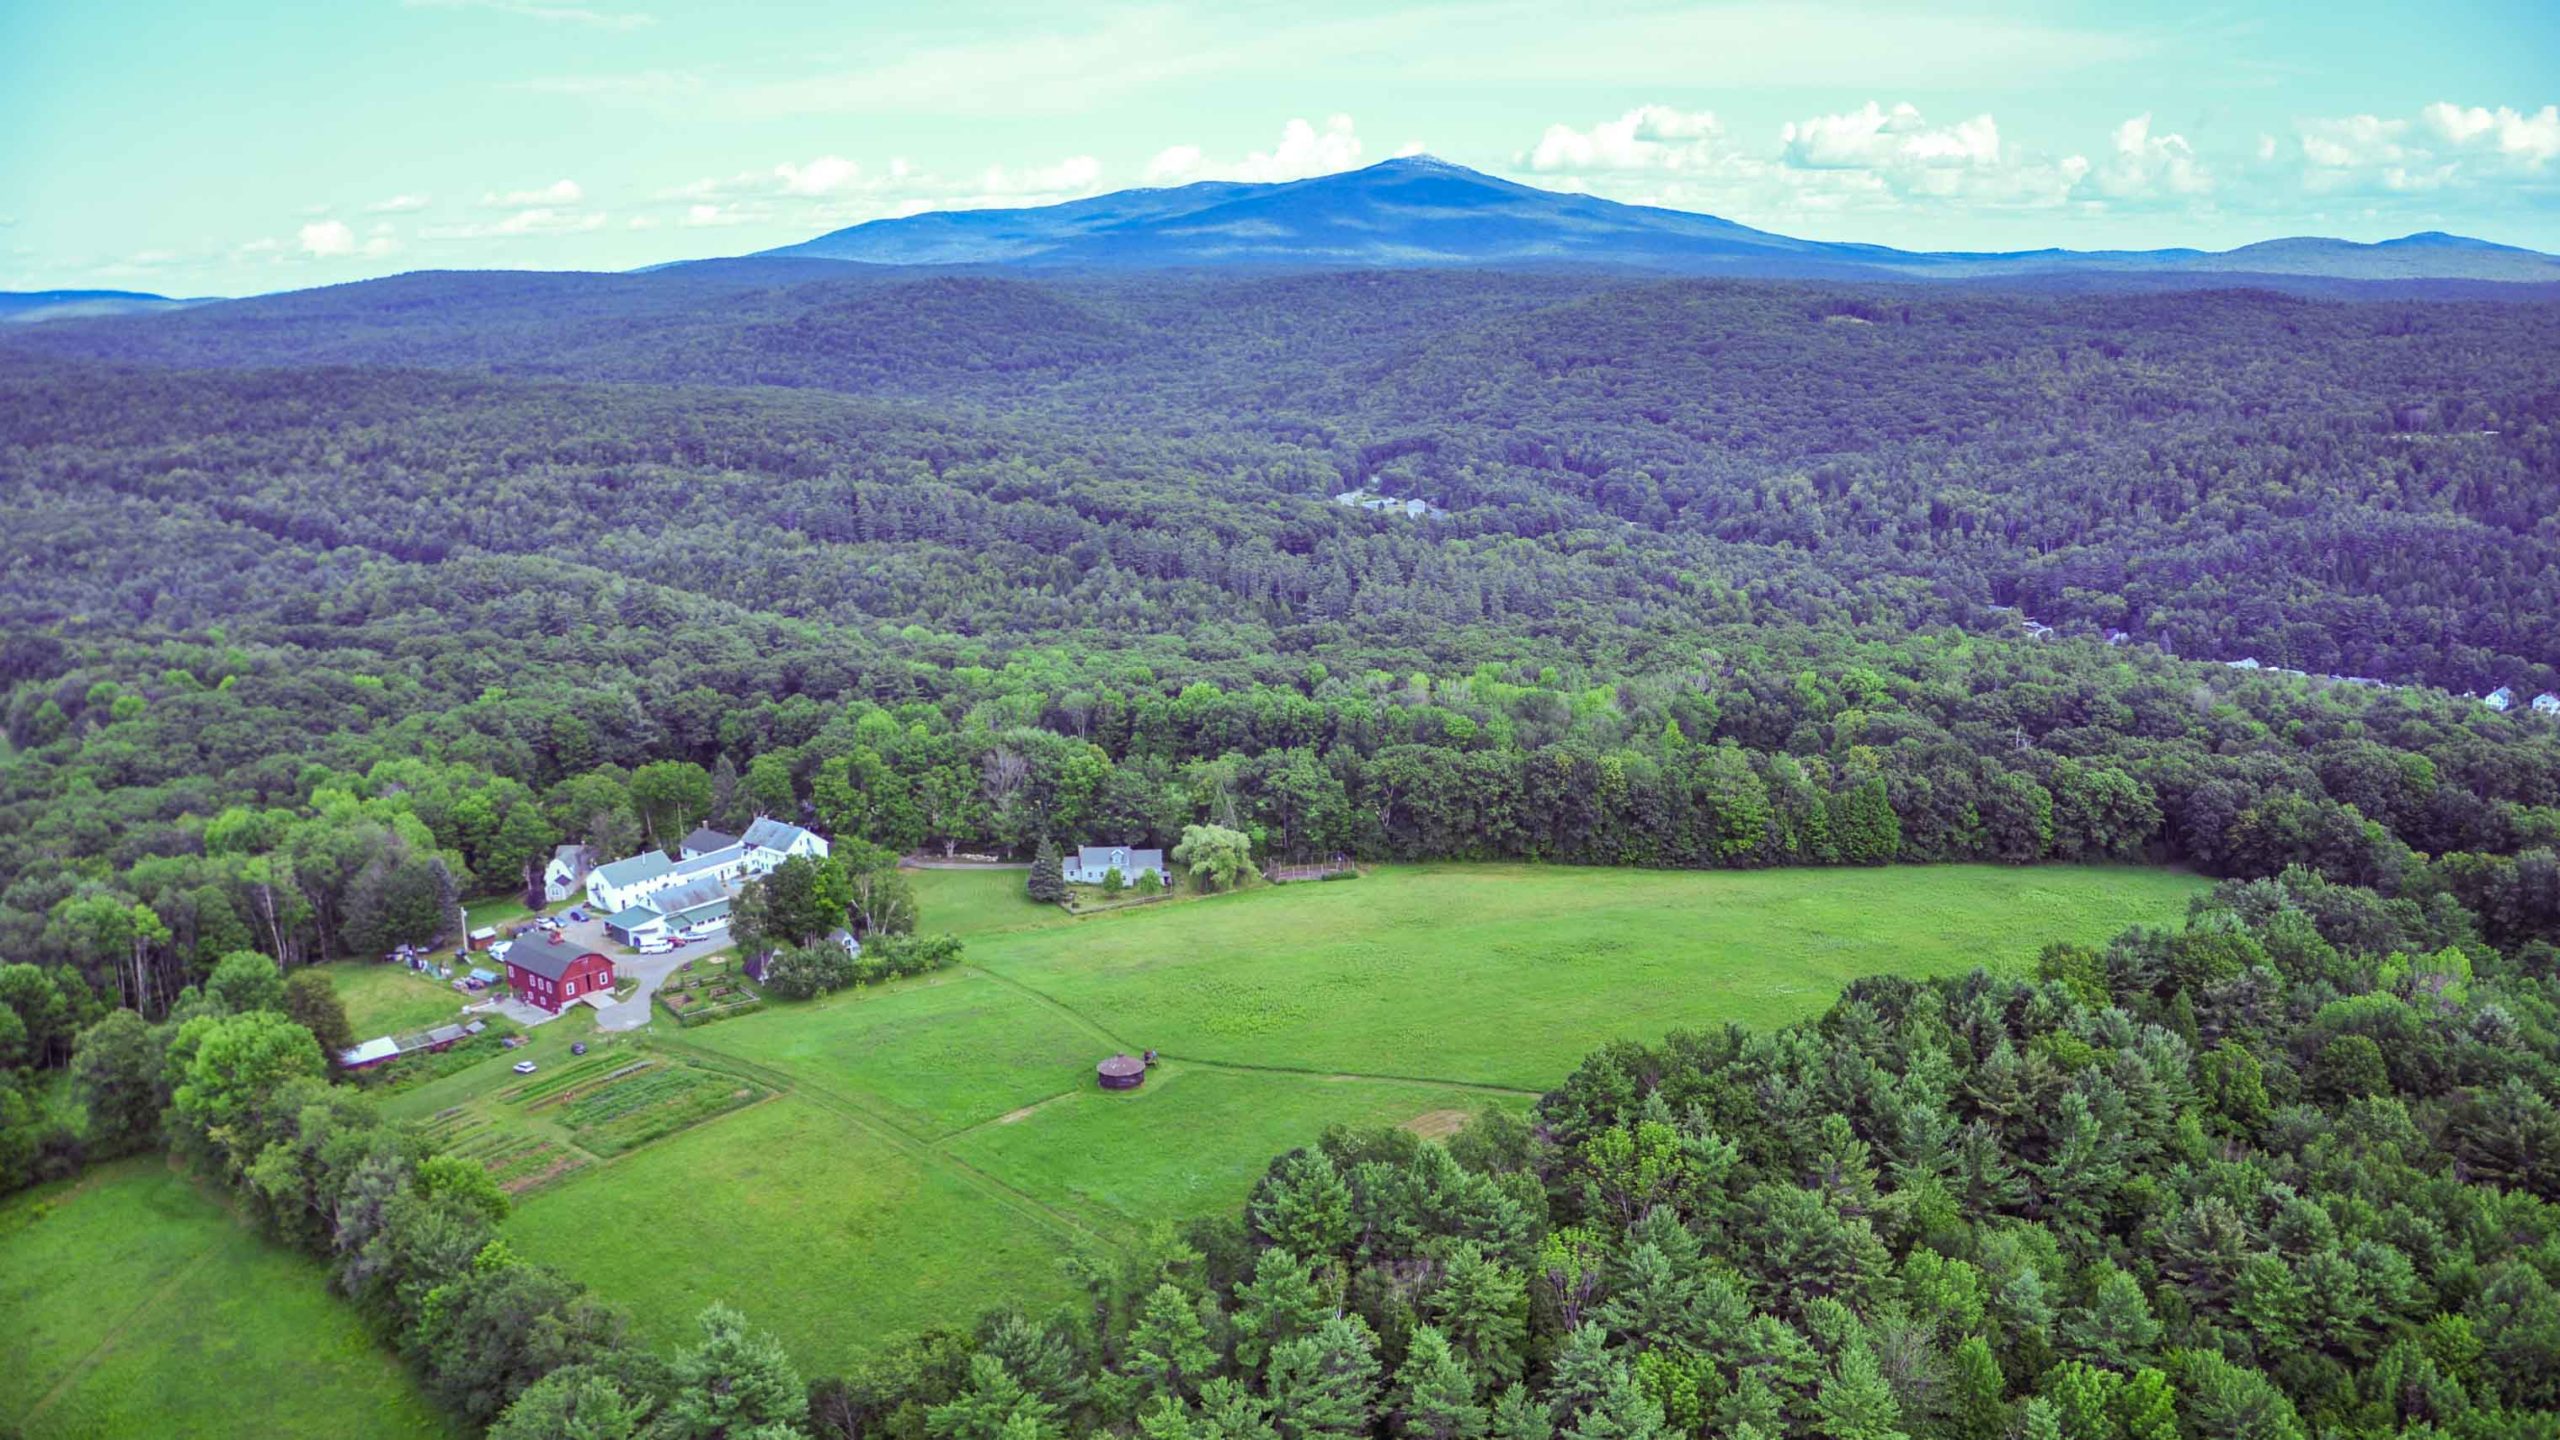 An aerial view of Glen Brook and the surrounding forests and mountains.